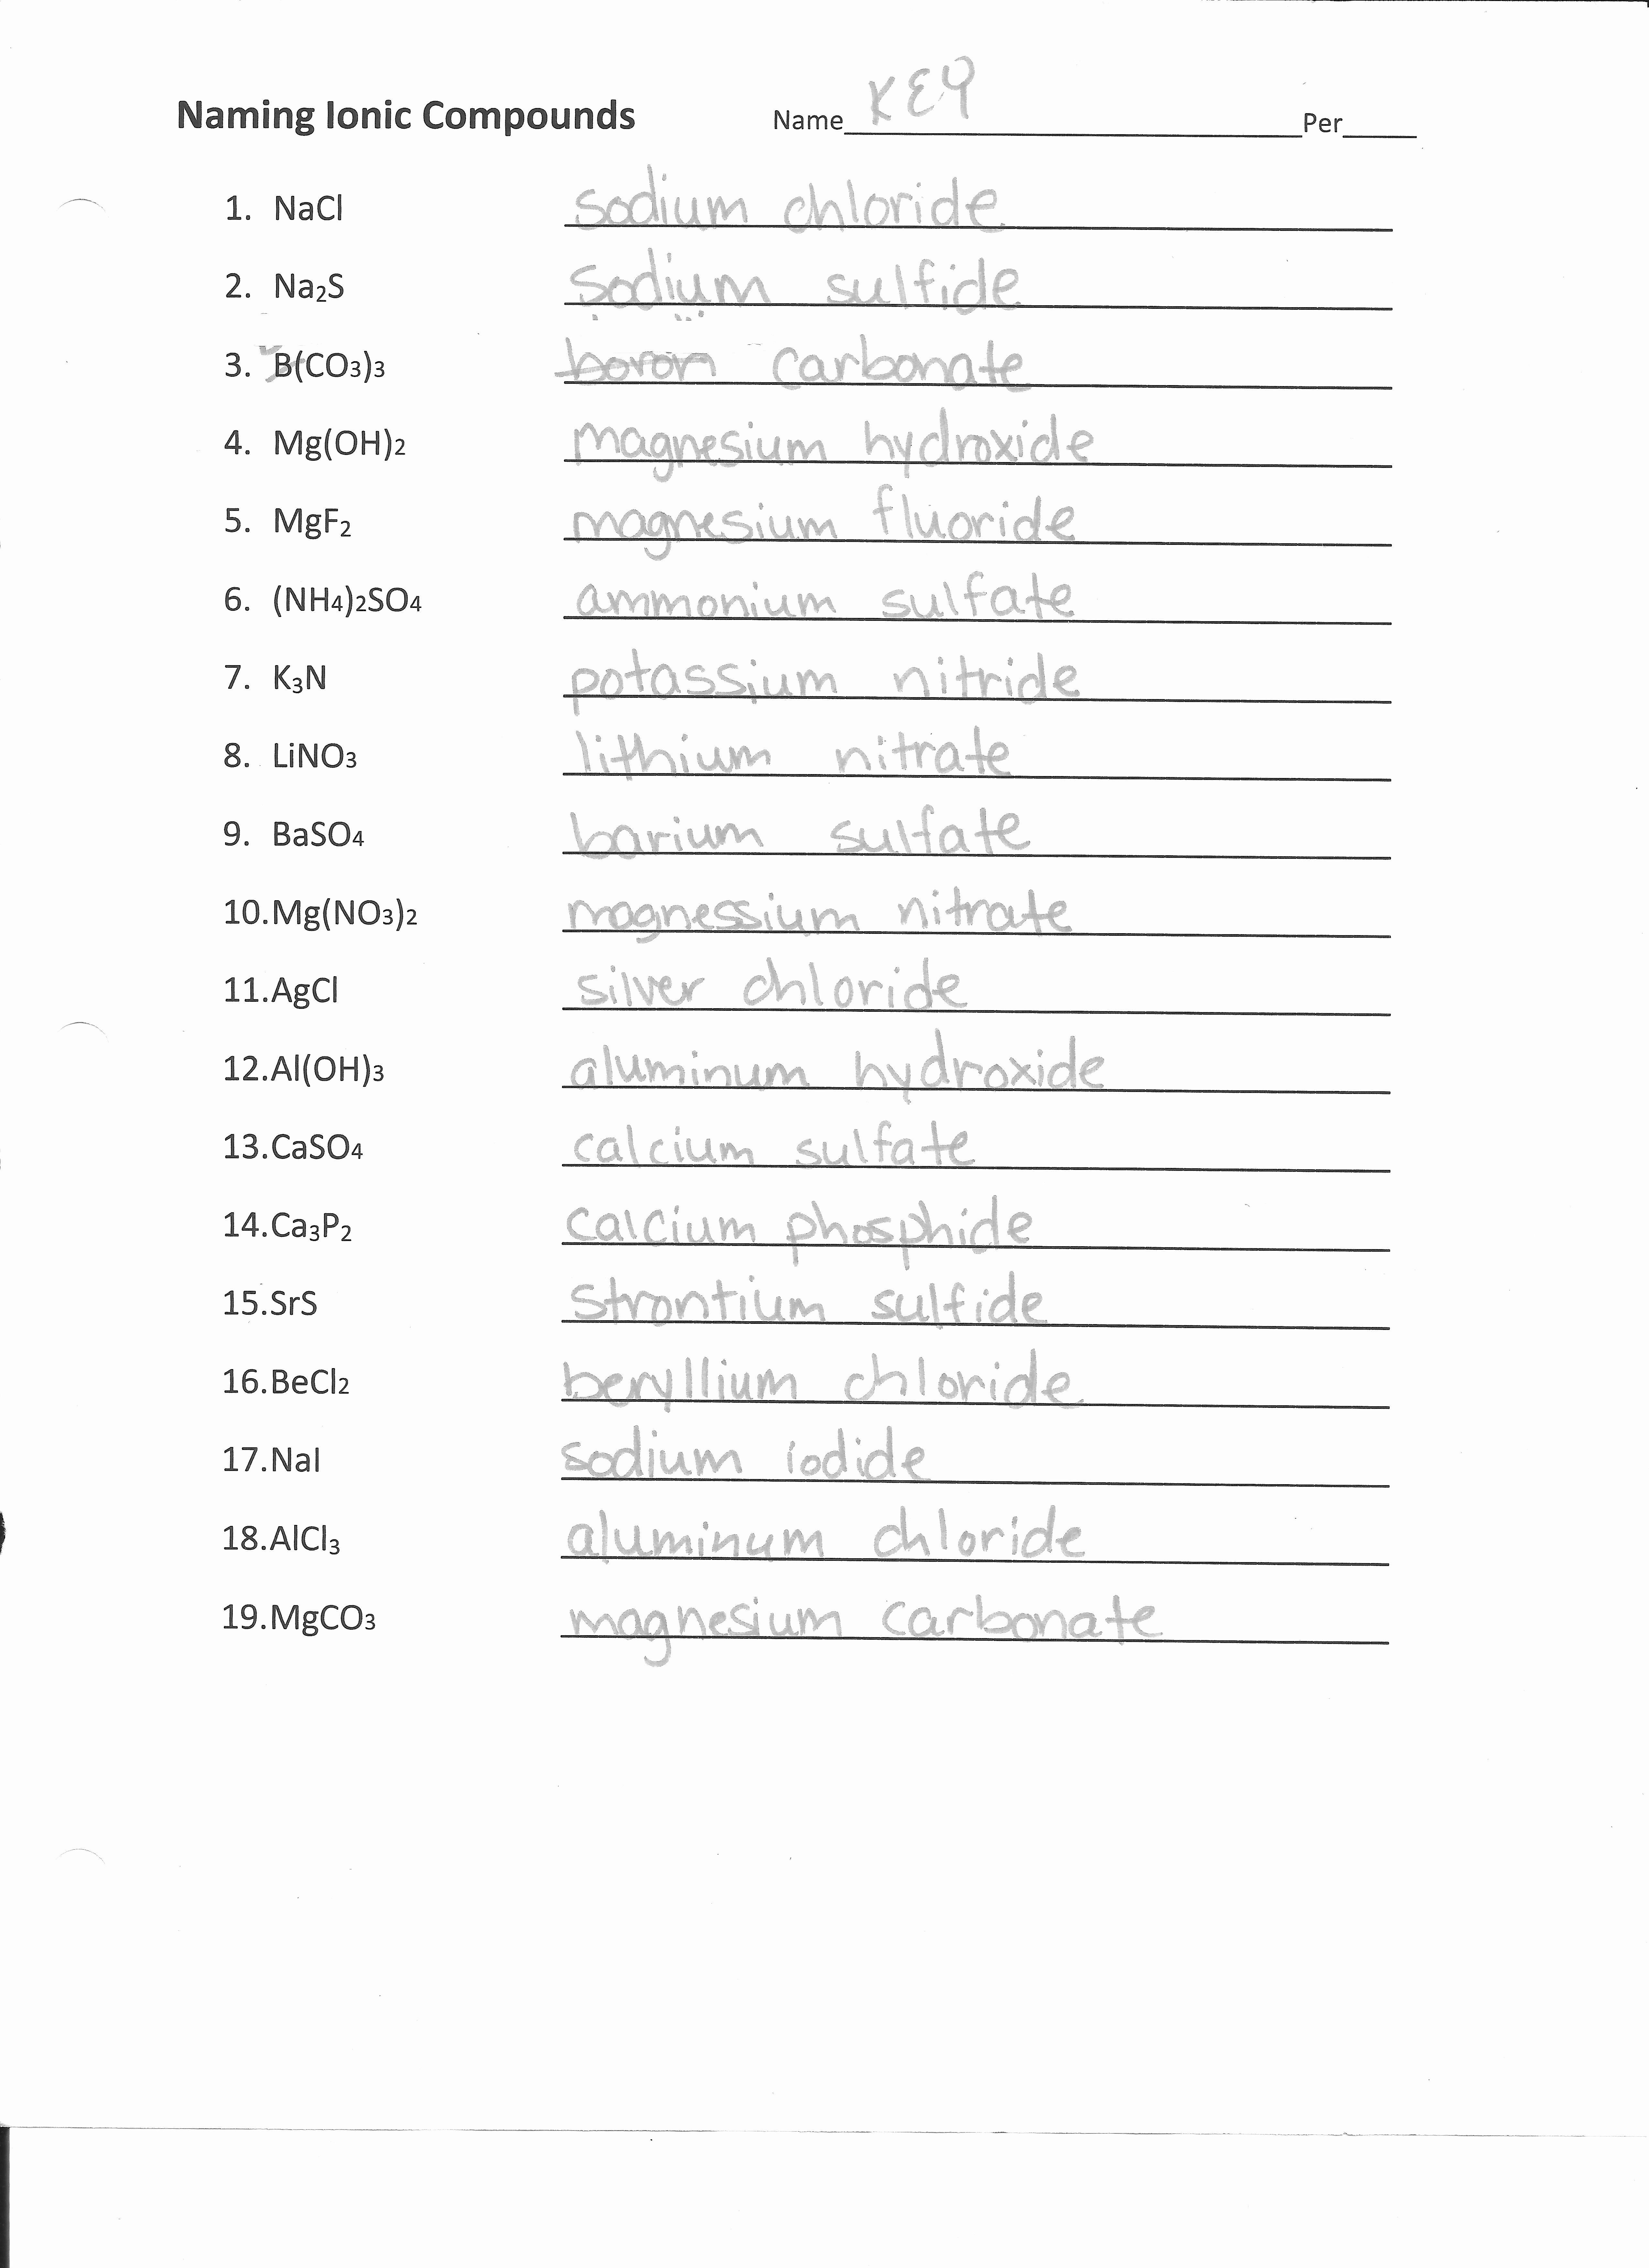 Simple Binary Ionic Compounds Worksheet Lovely Naming Binary Ionic Pounds Worksheet Answers